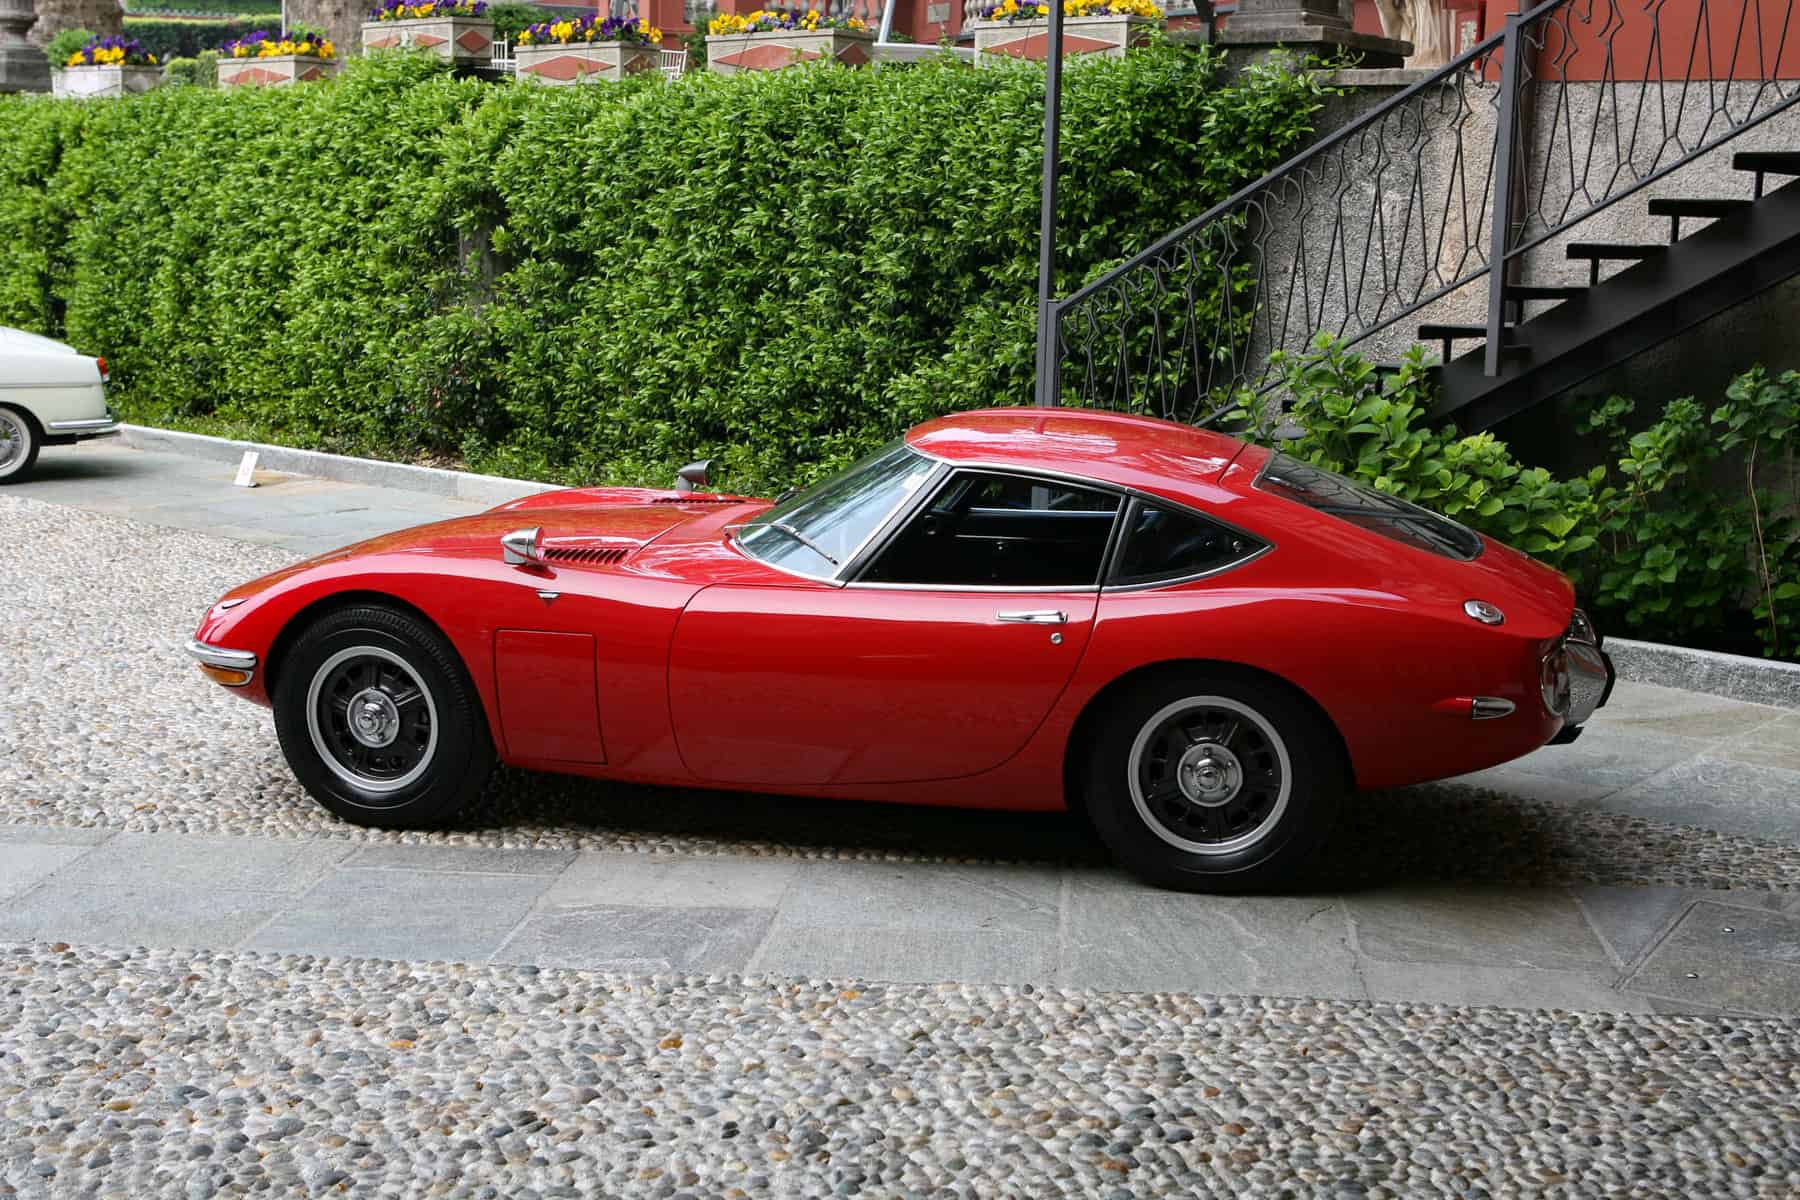 Toyota 2000 GT - The birth of the first Japanese supercar